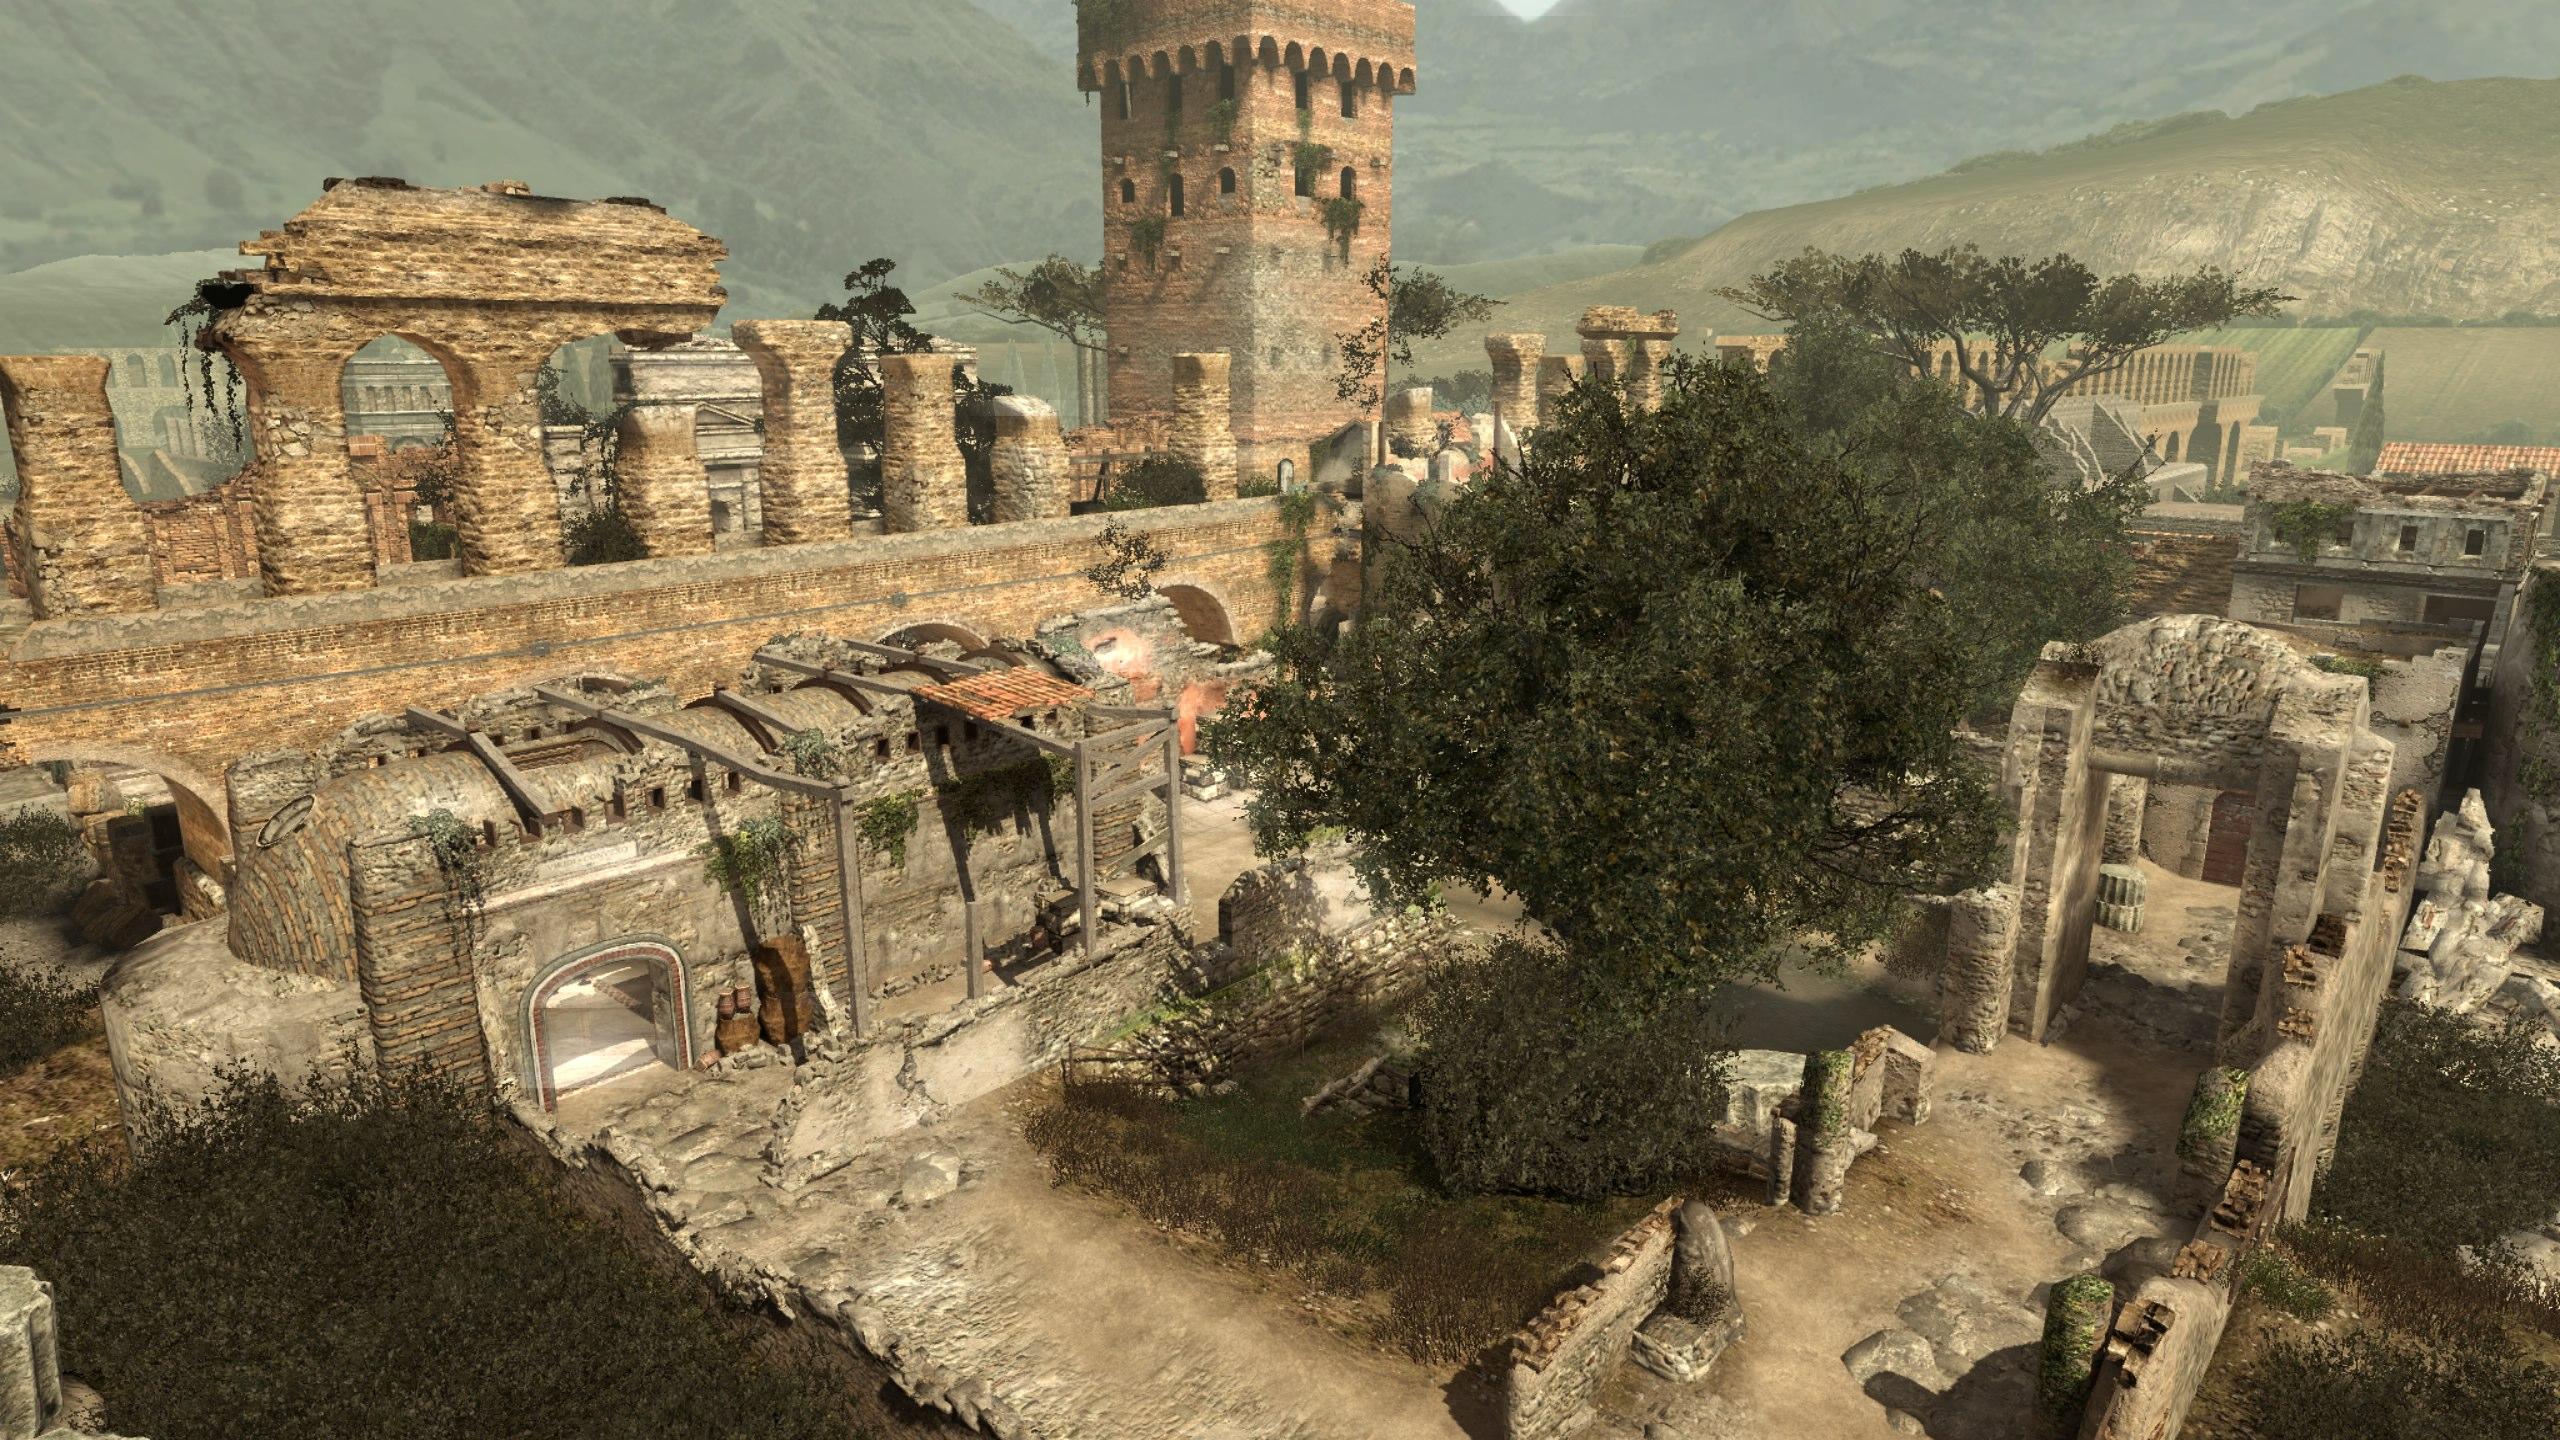 Erosion images - The Call of Duty Wiki - Black Ops II, Ghosts, and more!